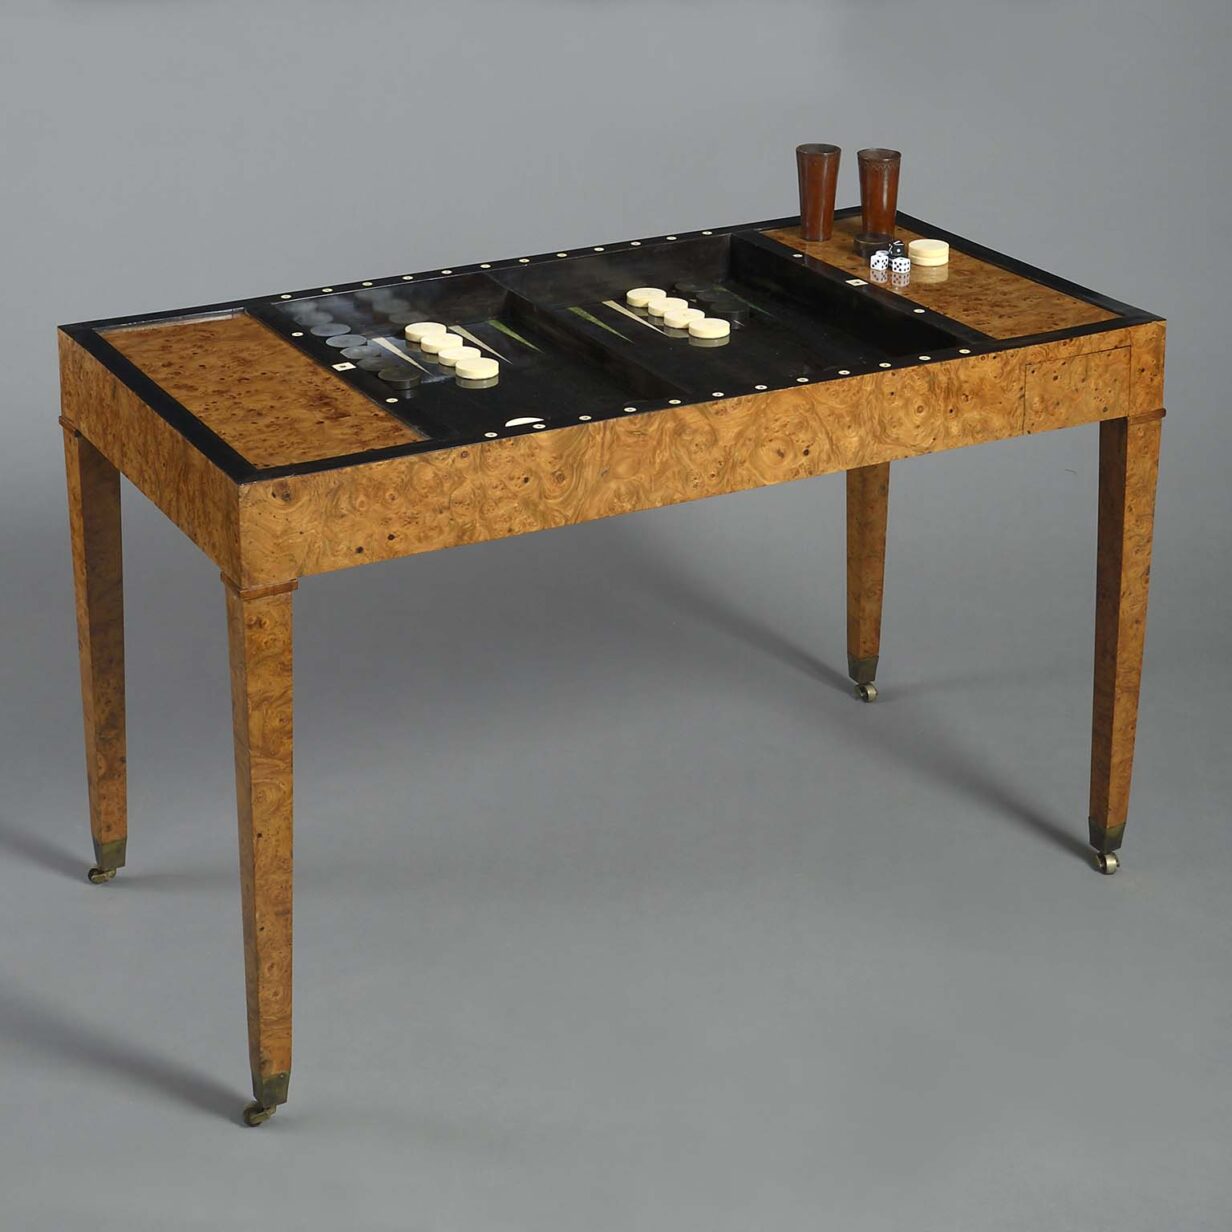 Rare late 18th century burr elm tric trac games table